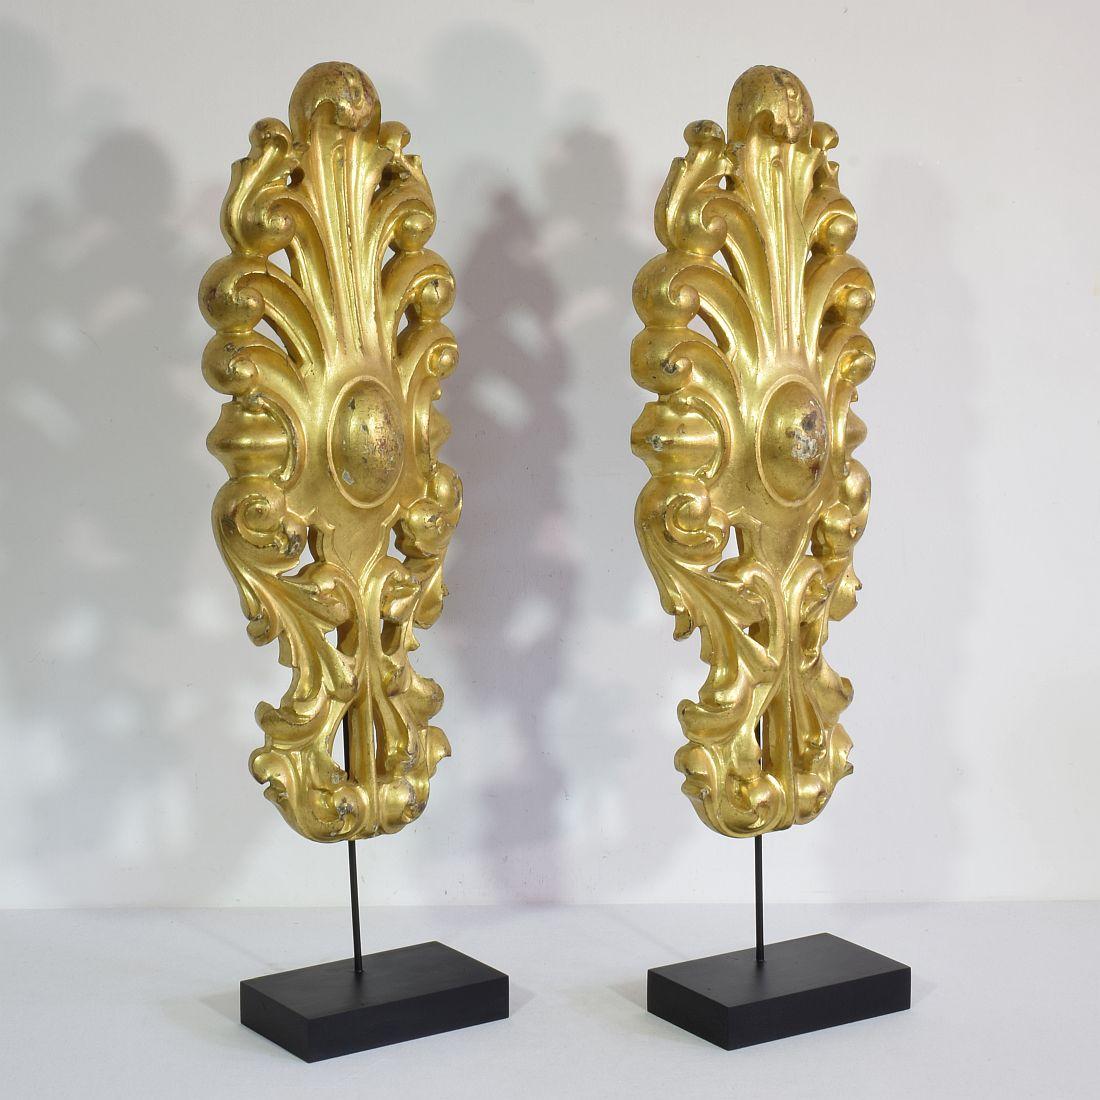 Hand-Carved Pair Large 18th Century Italian Neoclassical Carved Giltwood Ornaments